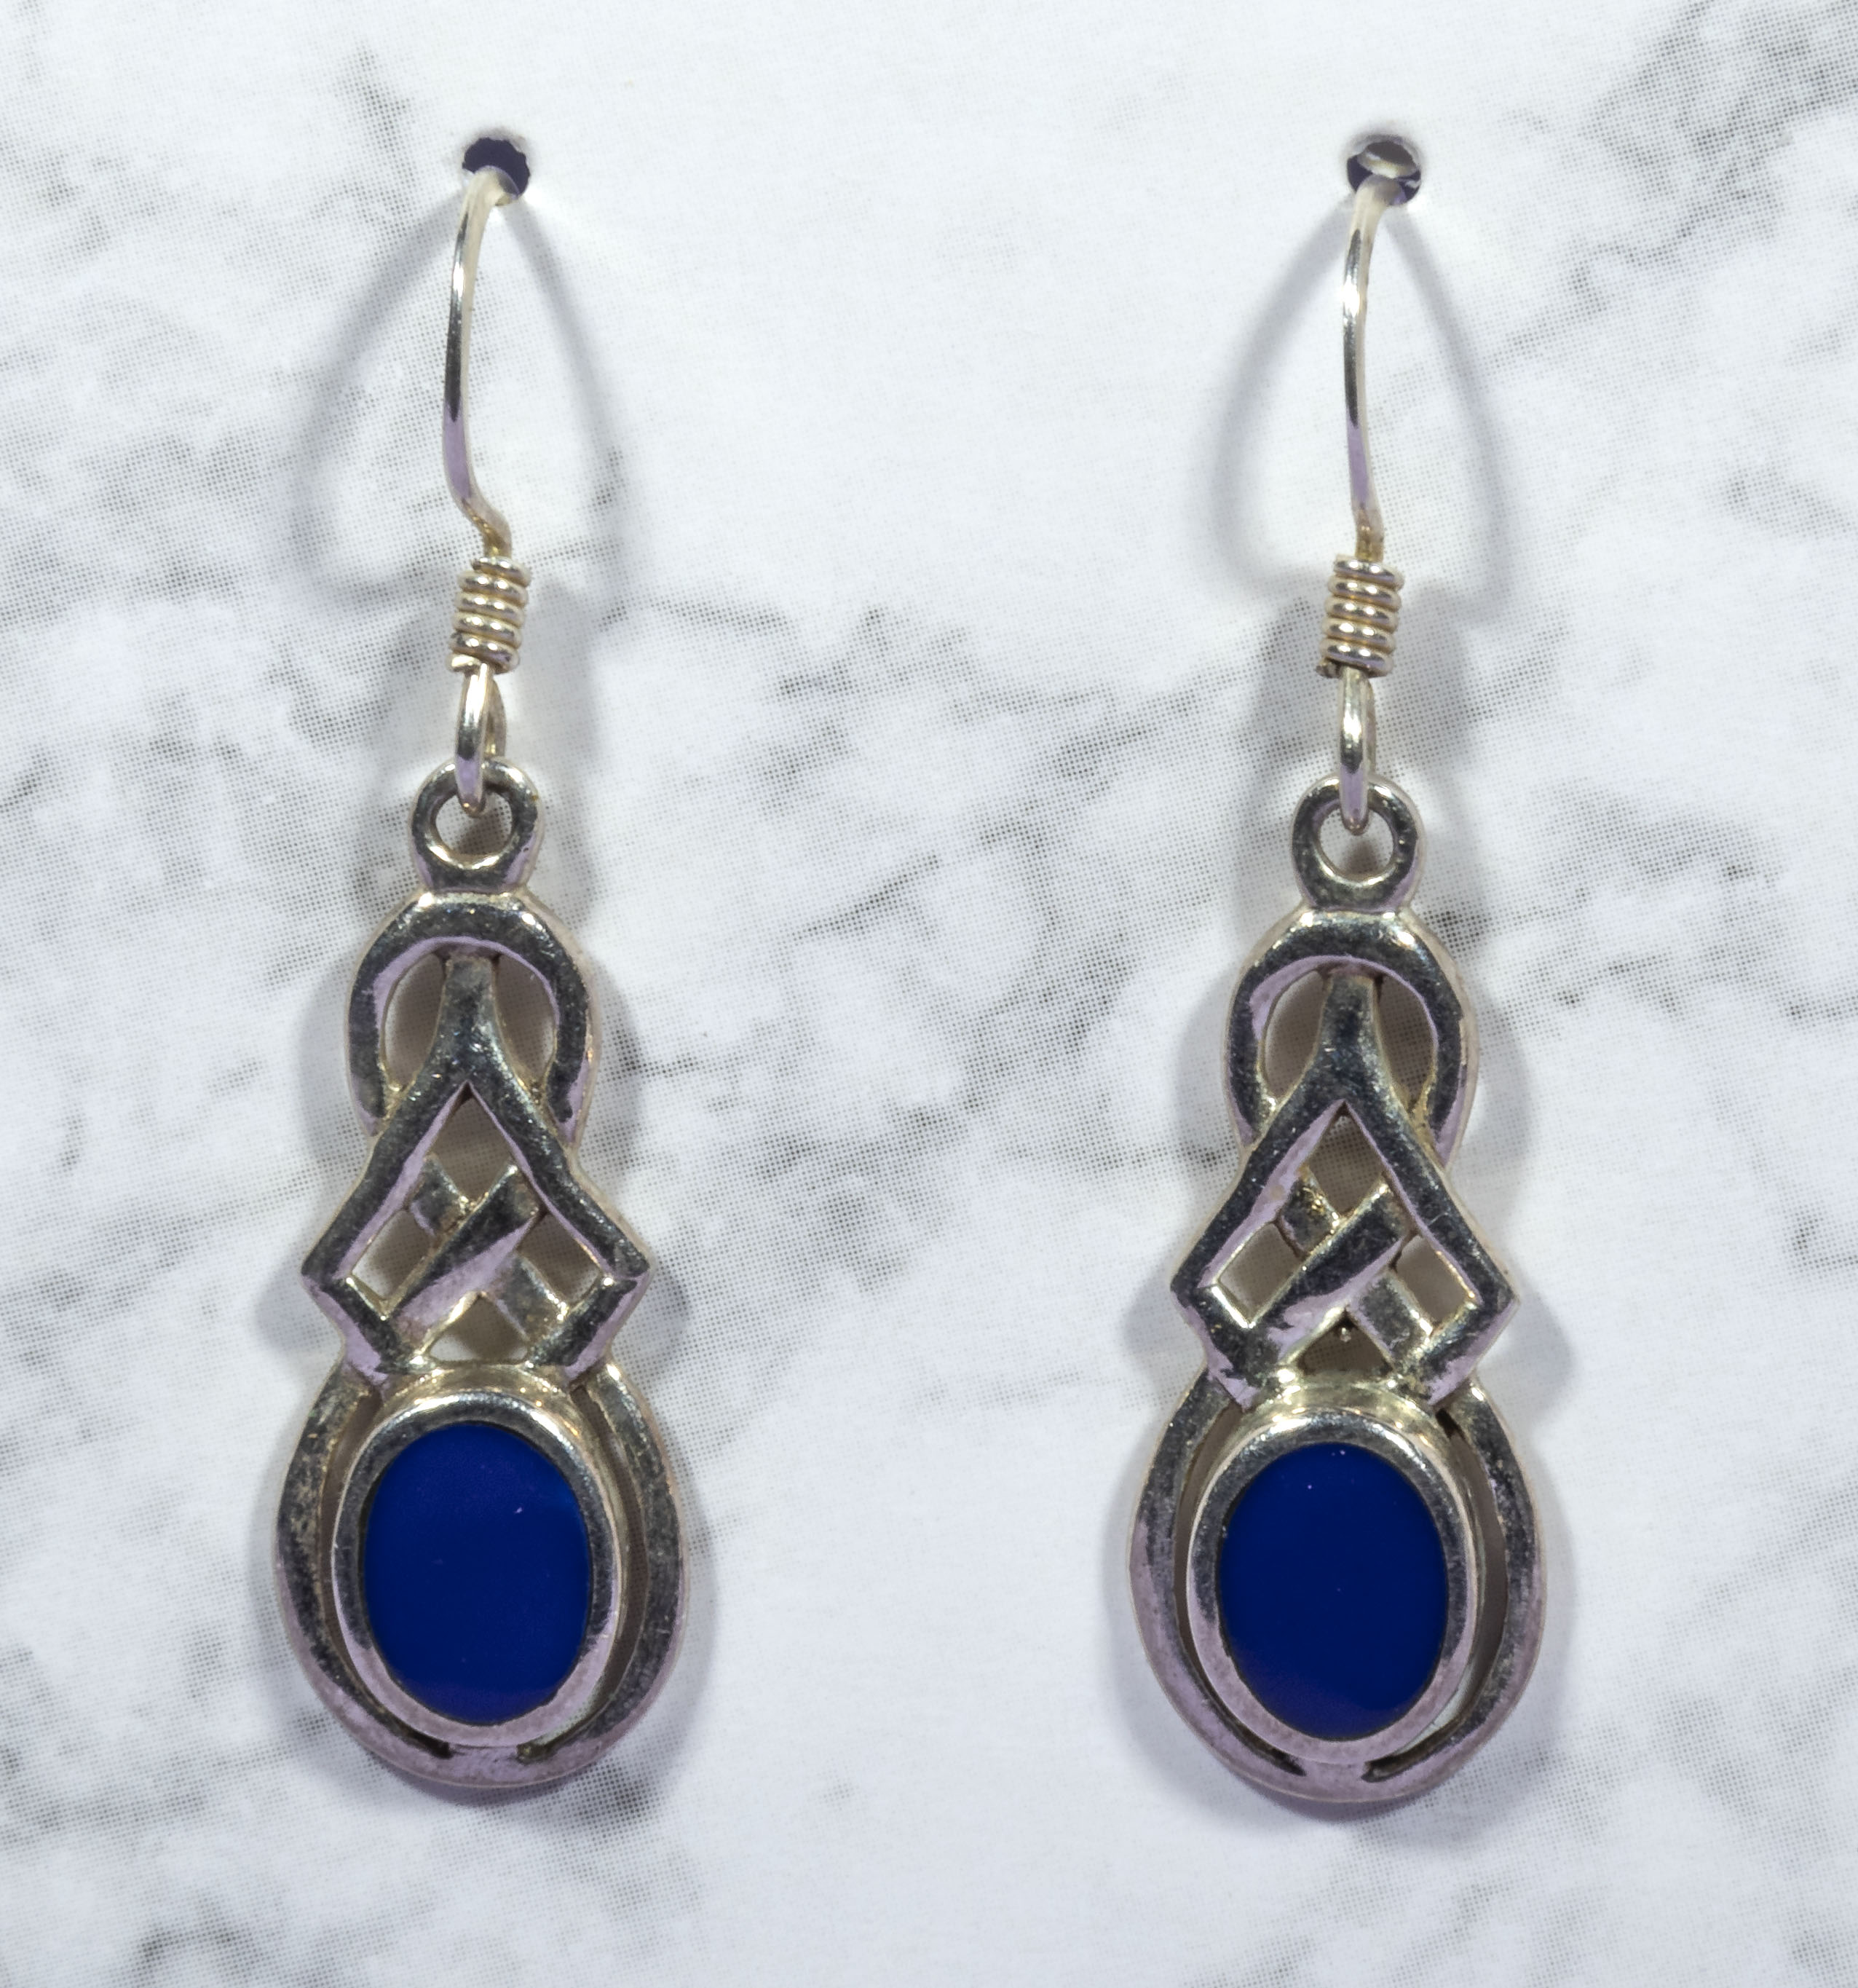 A pair of silver dropper earrings set with blue stones